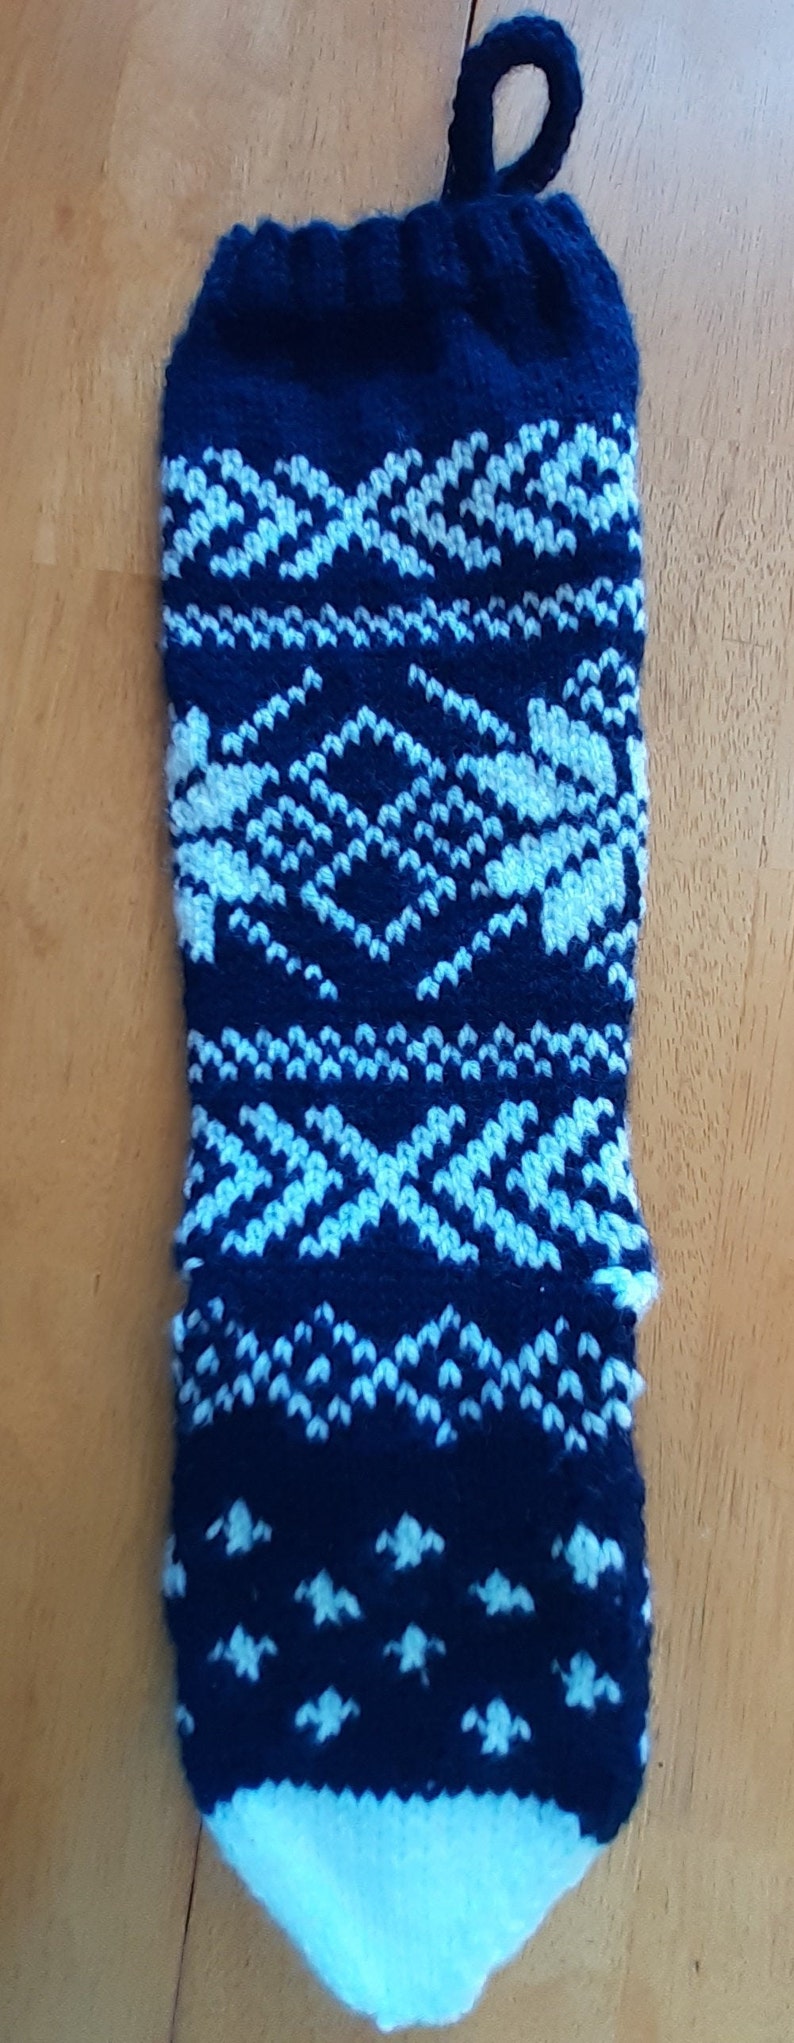 Hand knit blue and white Christmas Stocking with snowflake pattern